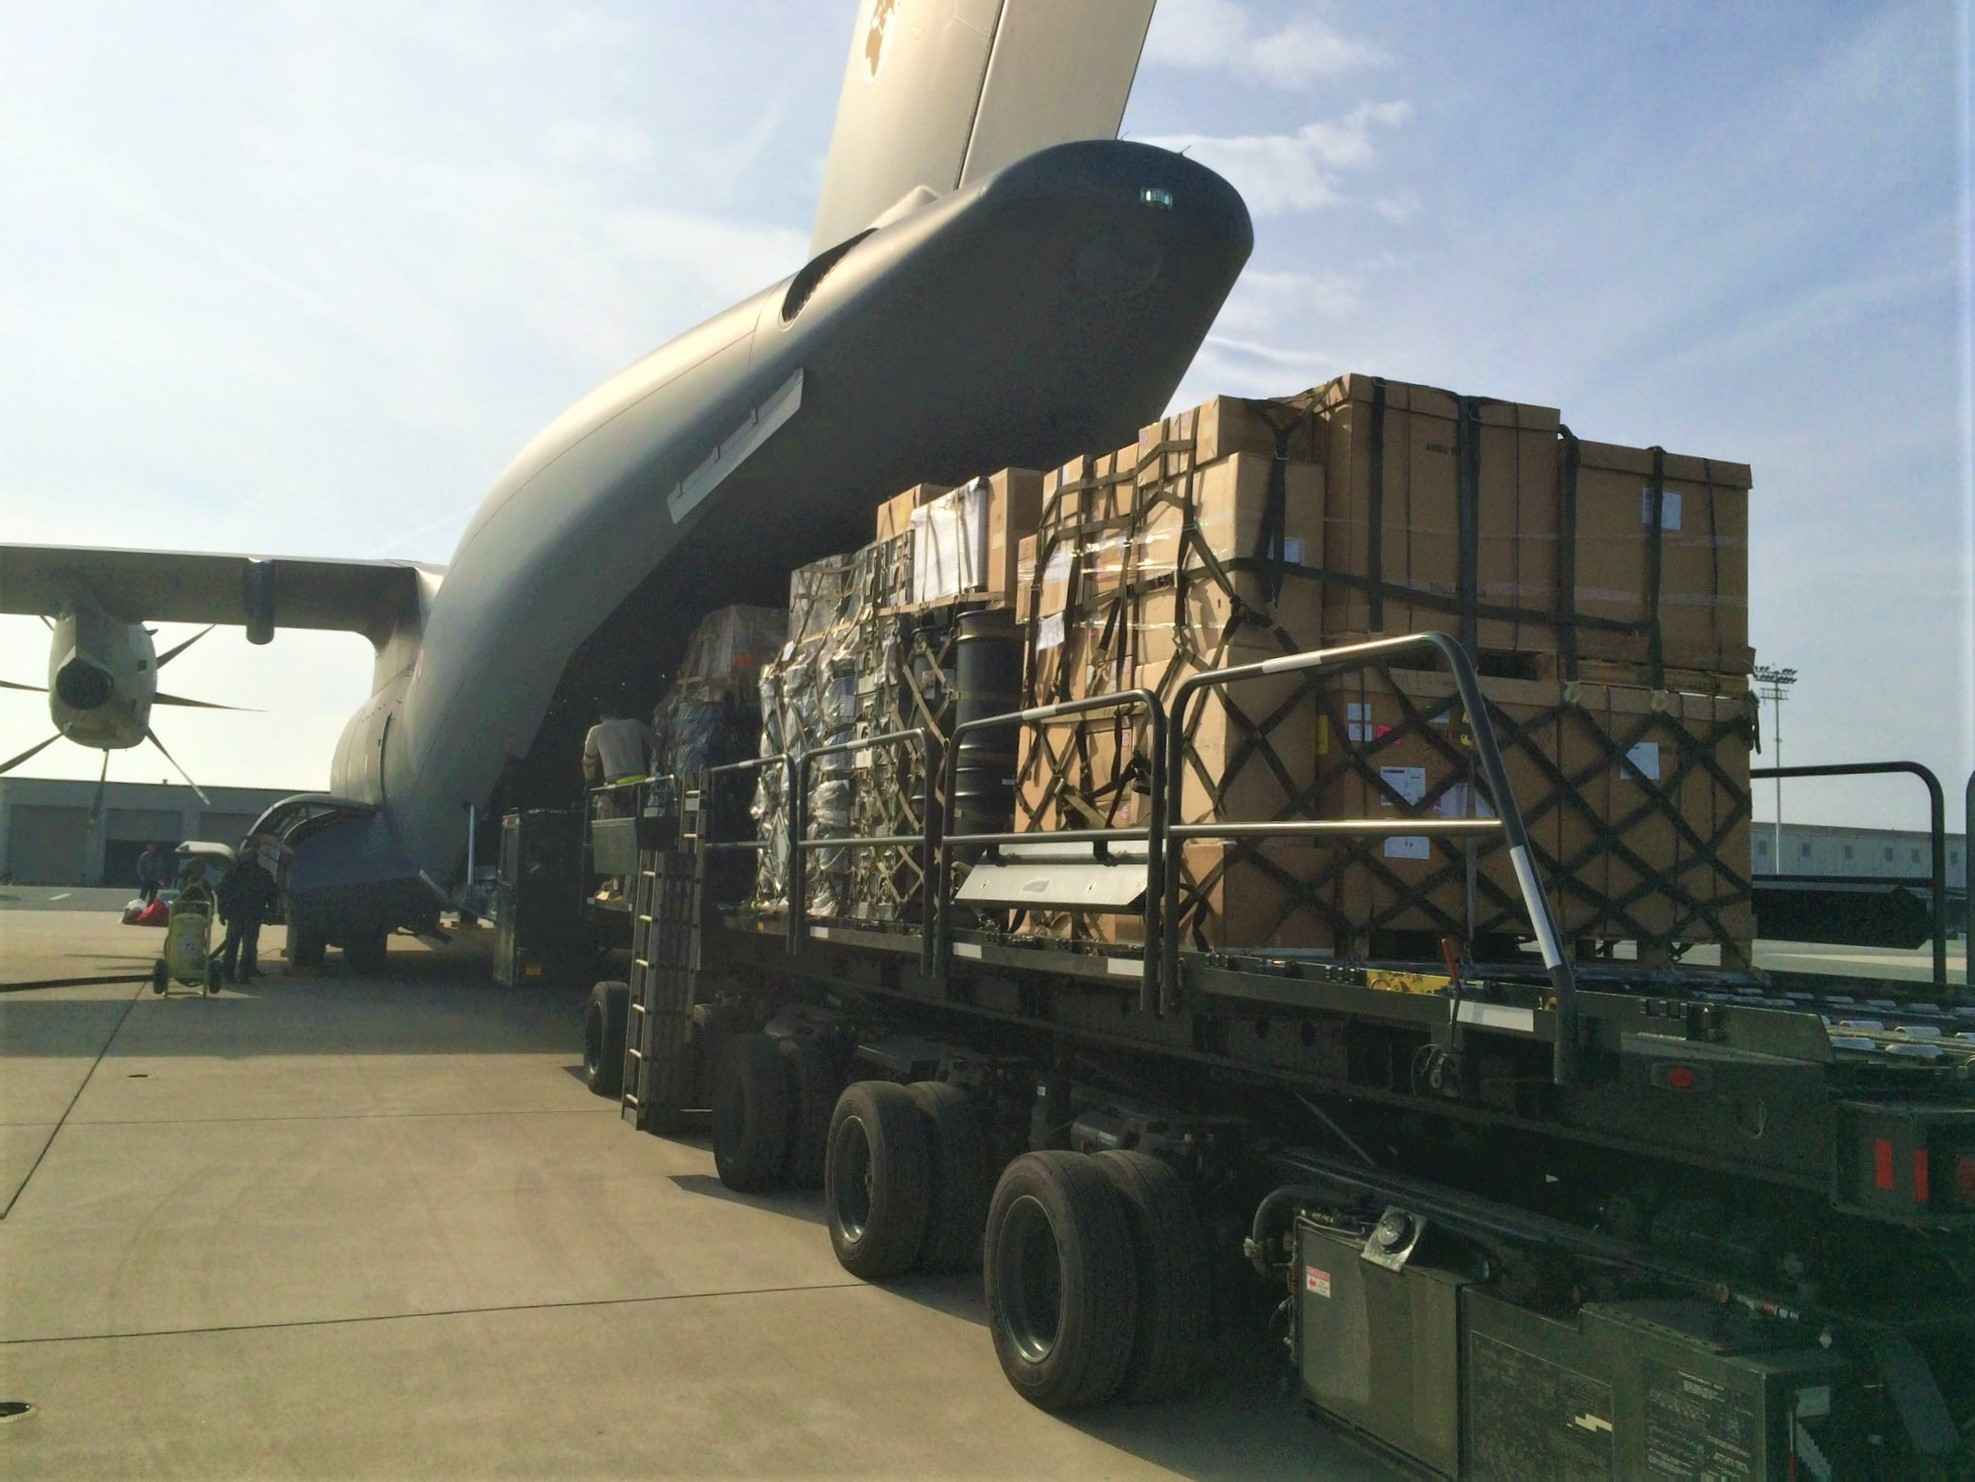 Cargo being loaded to airplane